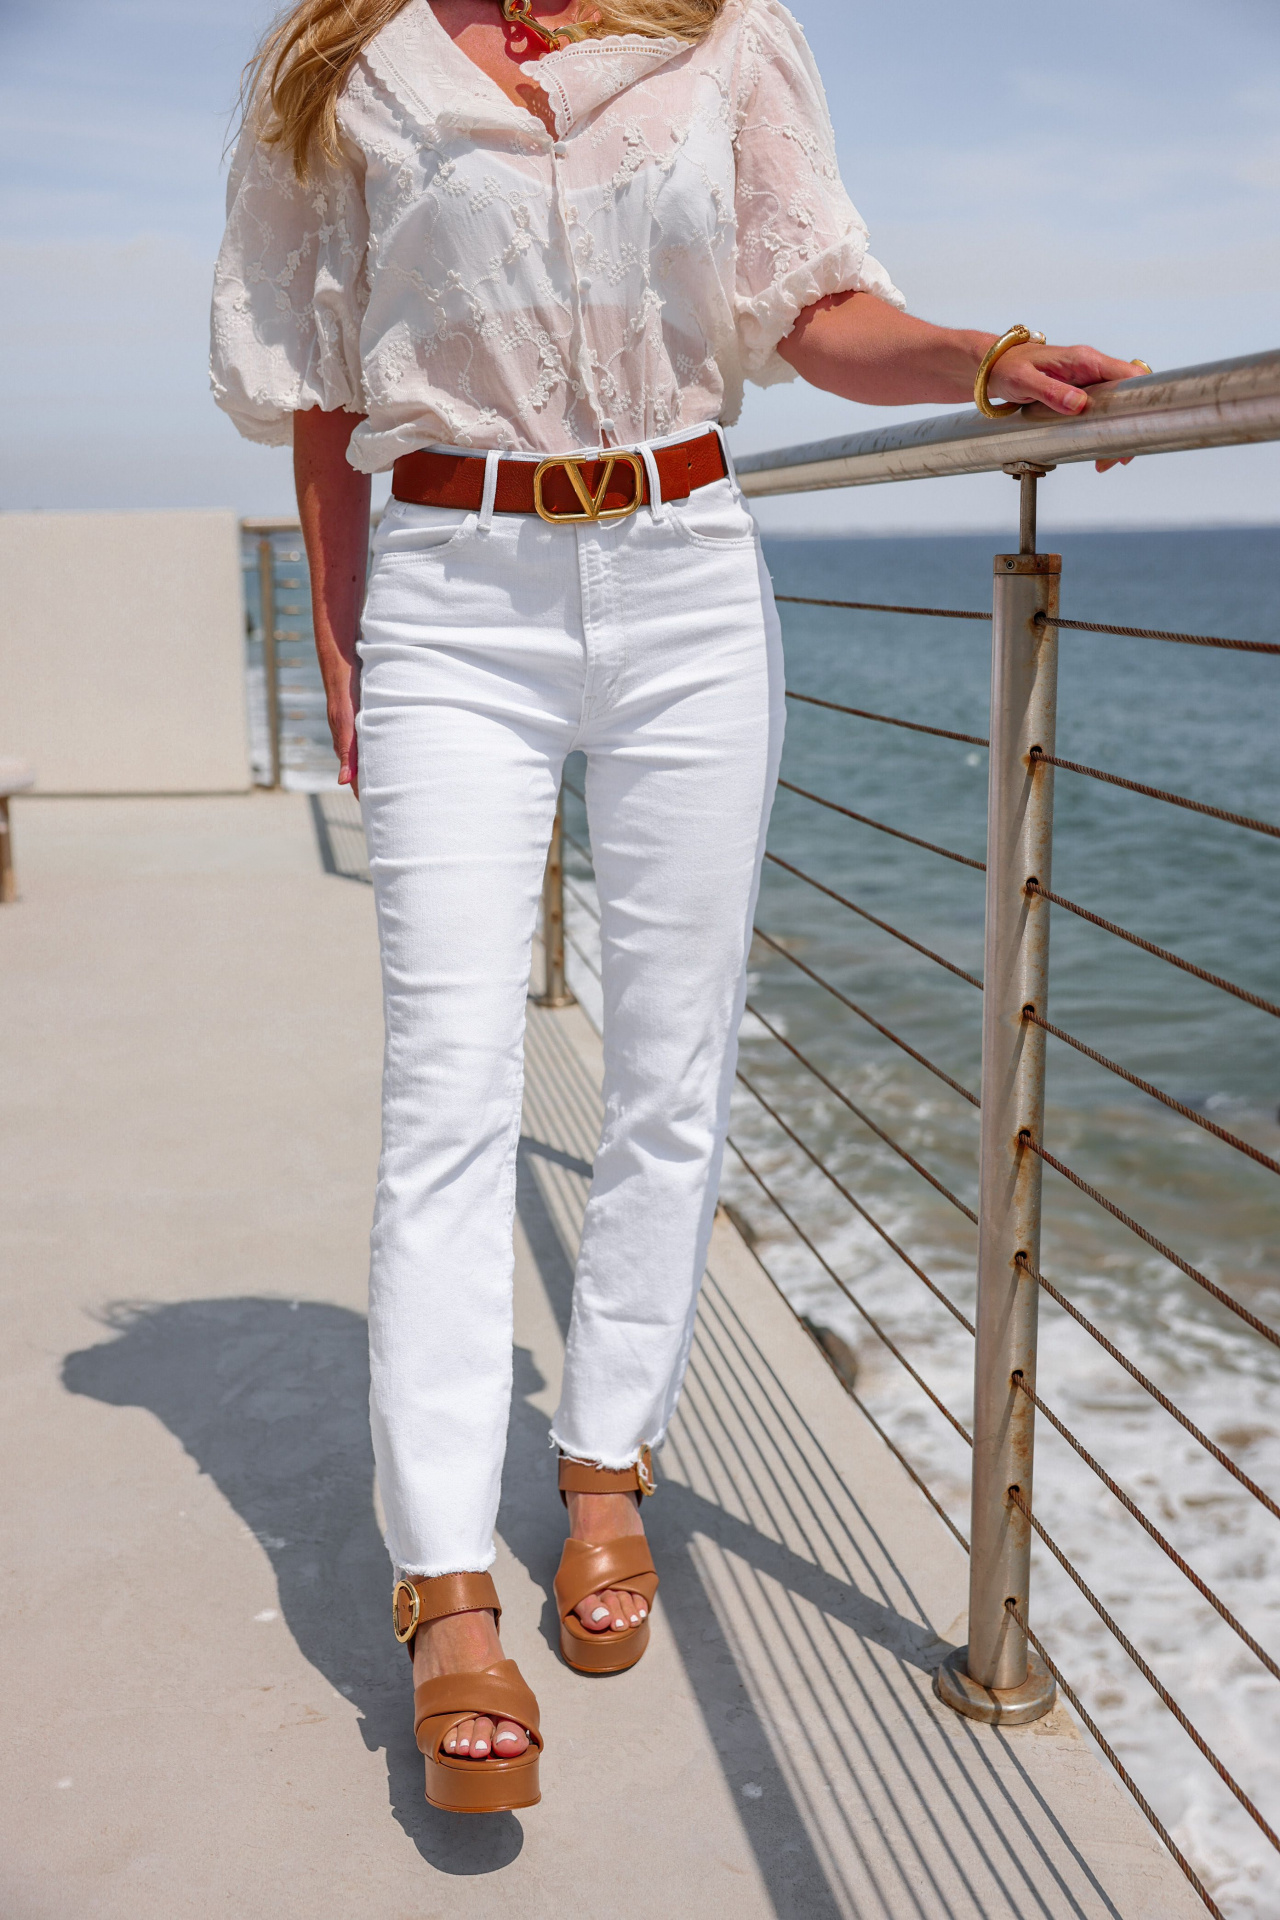 How to wear white jeans, high waisted white jeans, how to wear white jeans in summer, white jeans for women, what to wear with white jeans, erin busbee, busbee style, fashion over 40, malibu, california, white maje coiso embroidered cotton blouse, white mother hustler jeans, see by chloe platform heels, saint laurent square sunglasses, paco rabbane chunky gold necklace, dean davidson hoops